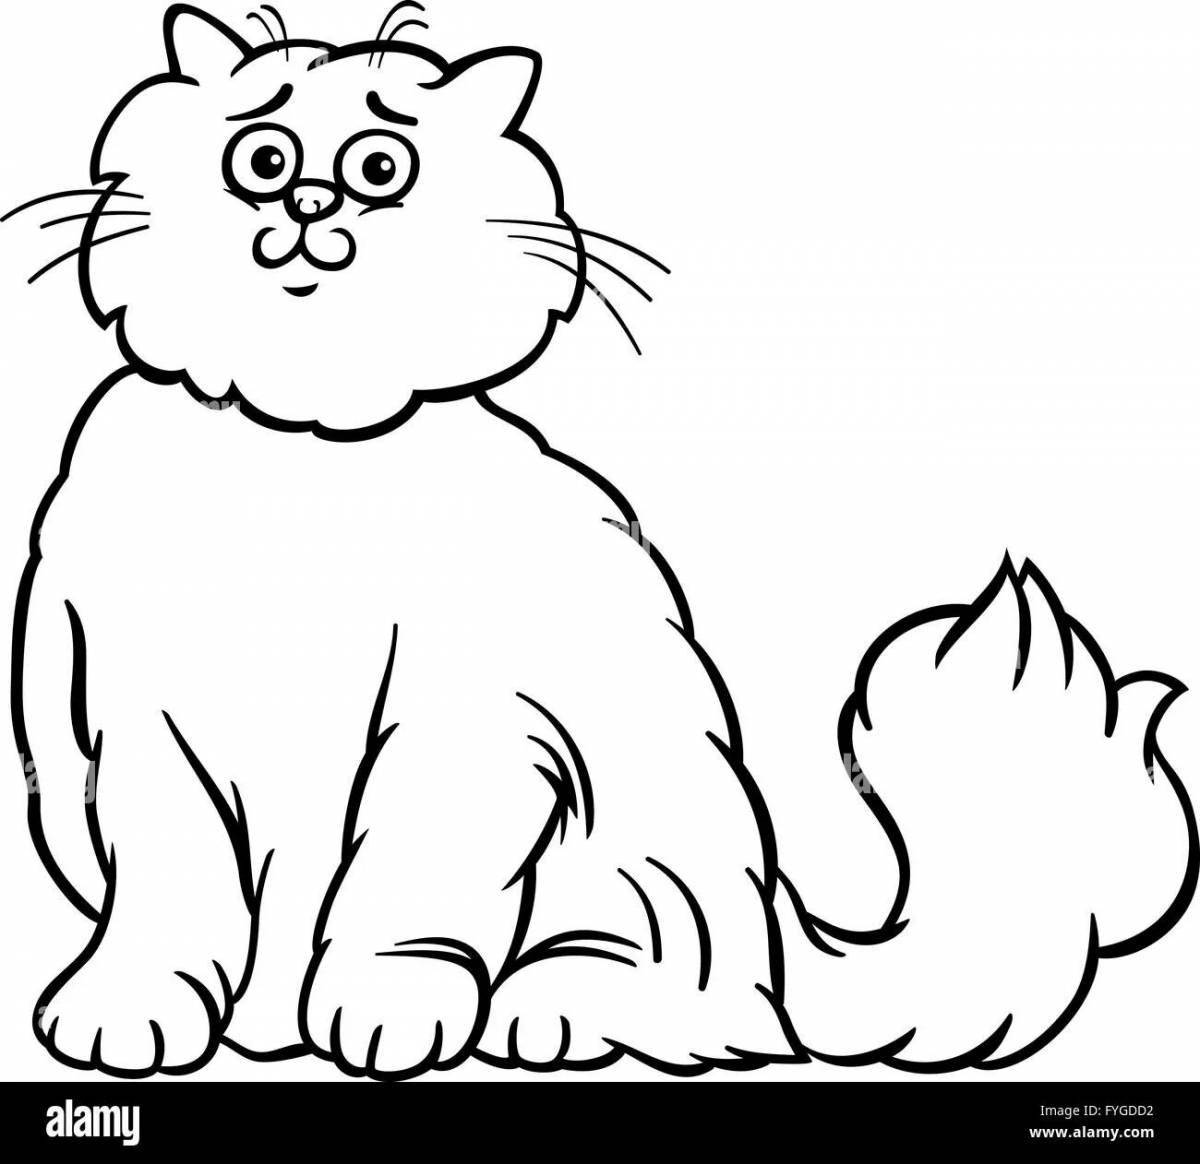 Adorable fluffy cat coloring book